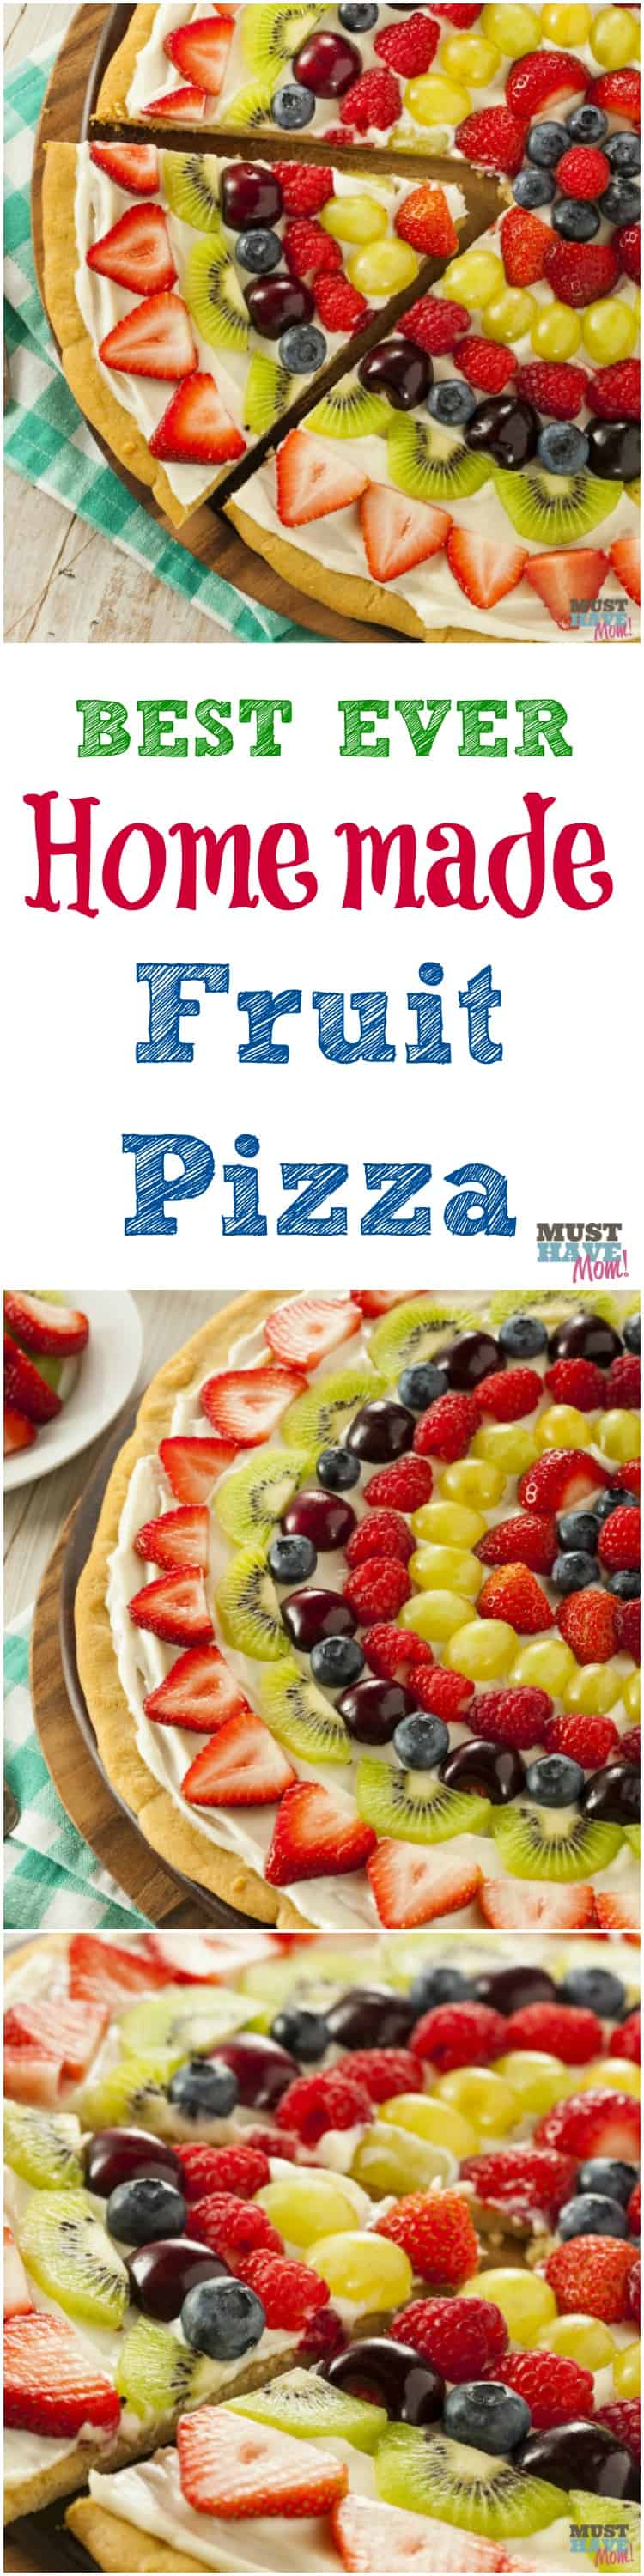 Best Ever Homemade Fruit Pizza Recipe. Make fruit pizza from scratch with this super easy recipe that tastes amazing and so much better than store bought sugar cookie dough! I can't believe how good this recipe is!